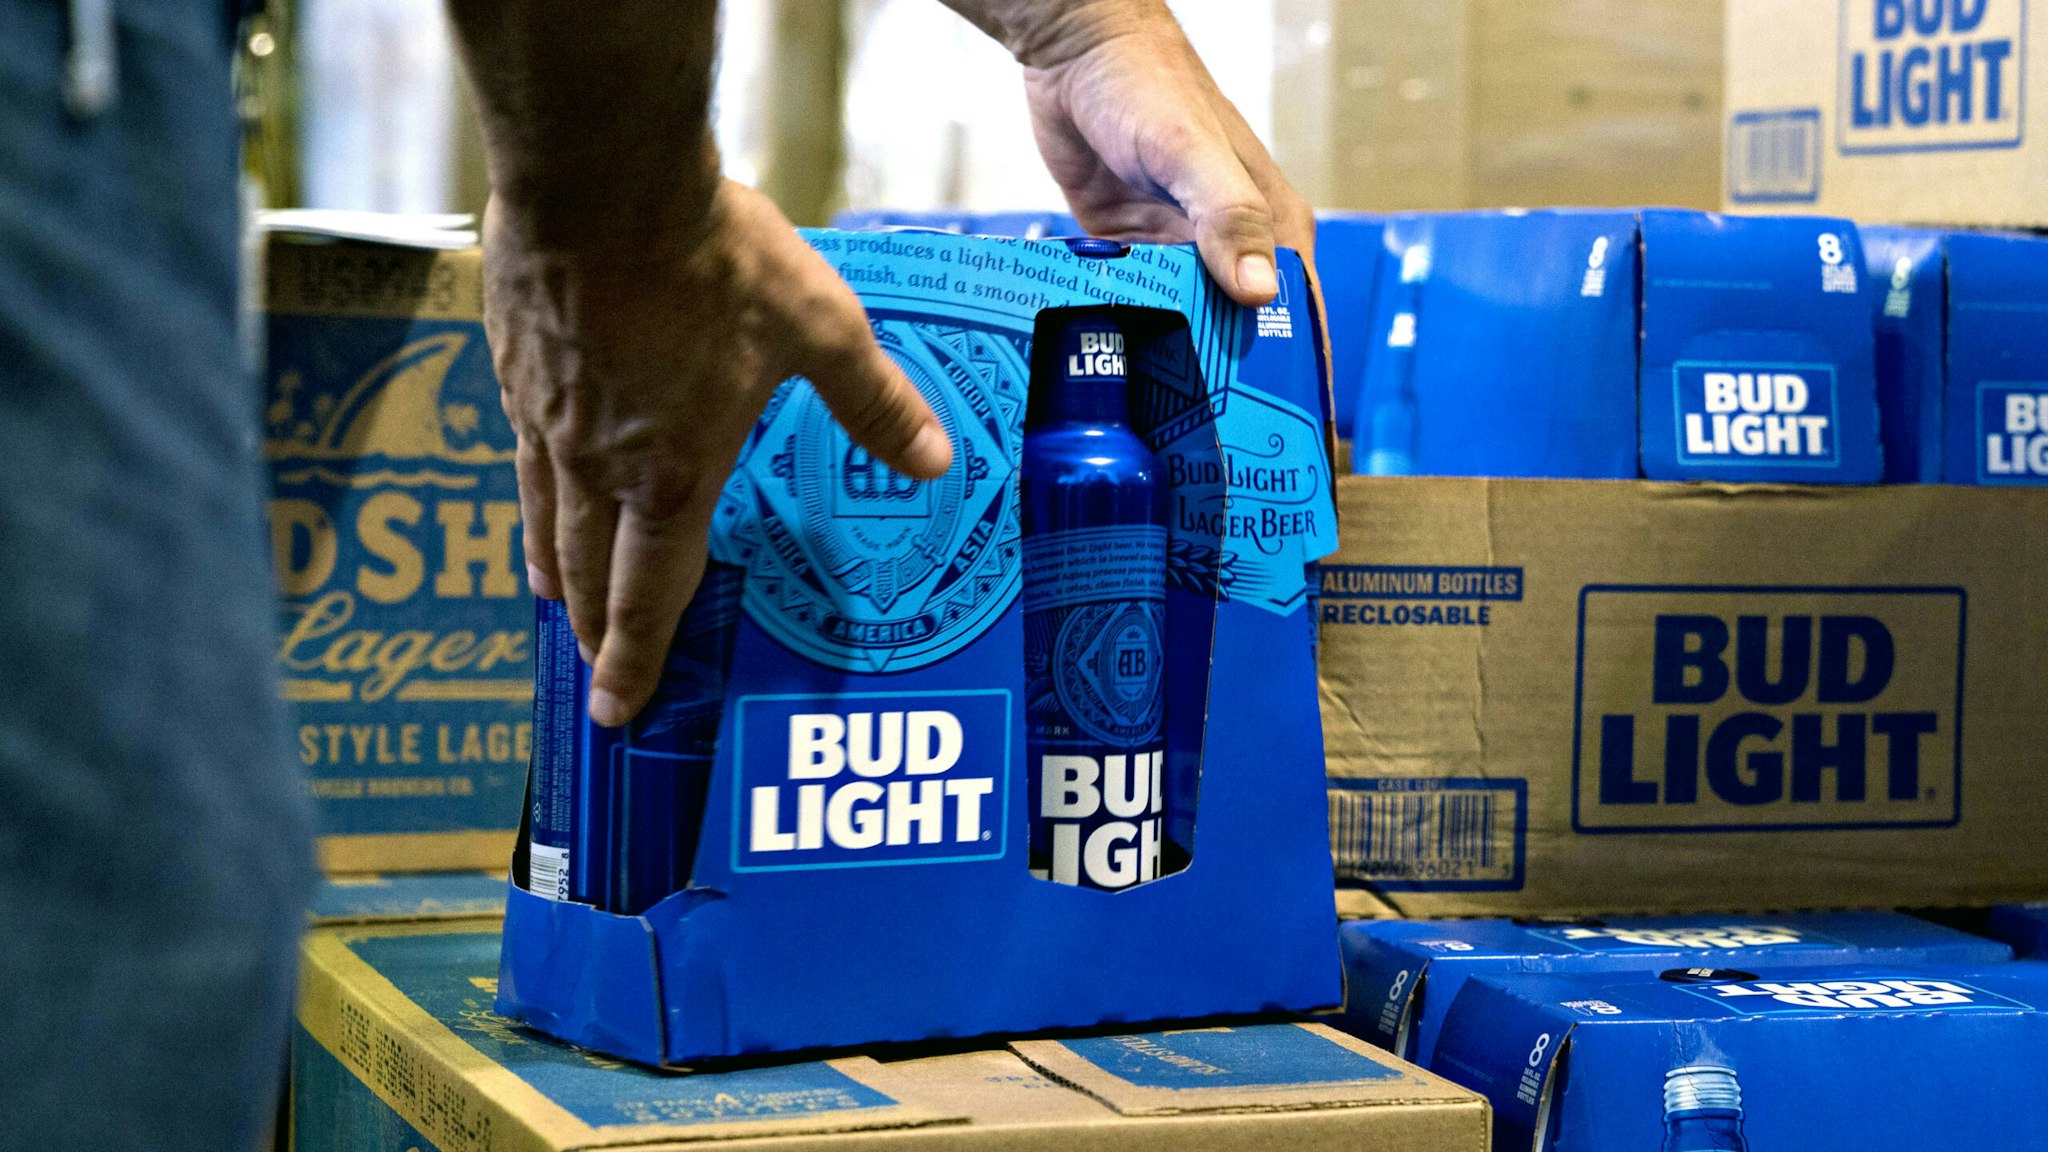 An employee adjusts bottles of Bud Light brand beer at an Anheuser-Busch InBev NV facility during a campaign stop by Senator Tim Kaine, a Democrat from Virginia, not pictured, in Williamsburg, Virginia, U.S., on Wednesday, Aug. 8, 2018. Kaine will face Republican opponent Corey Stewart in the November midterm elections.